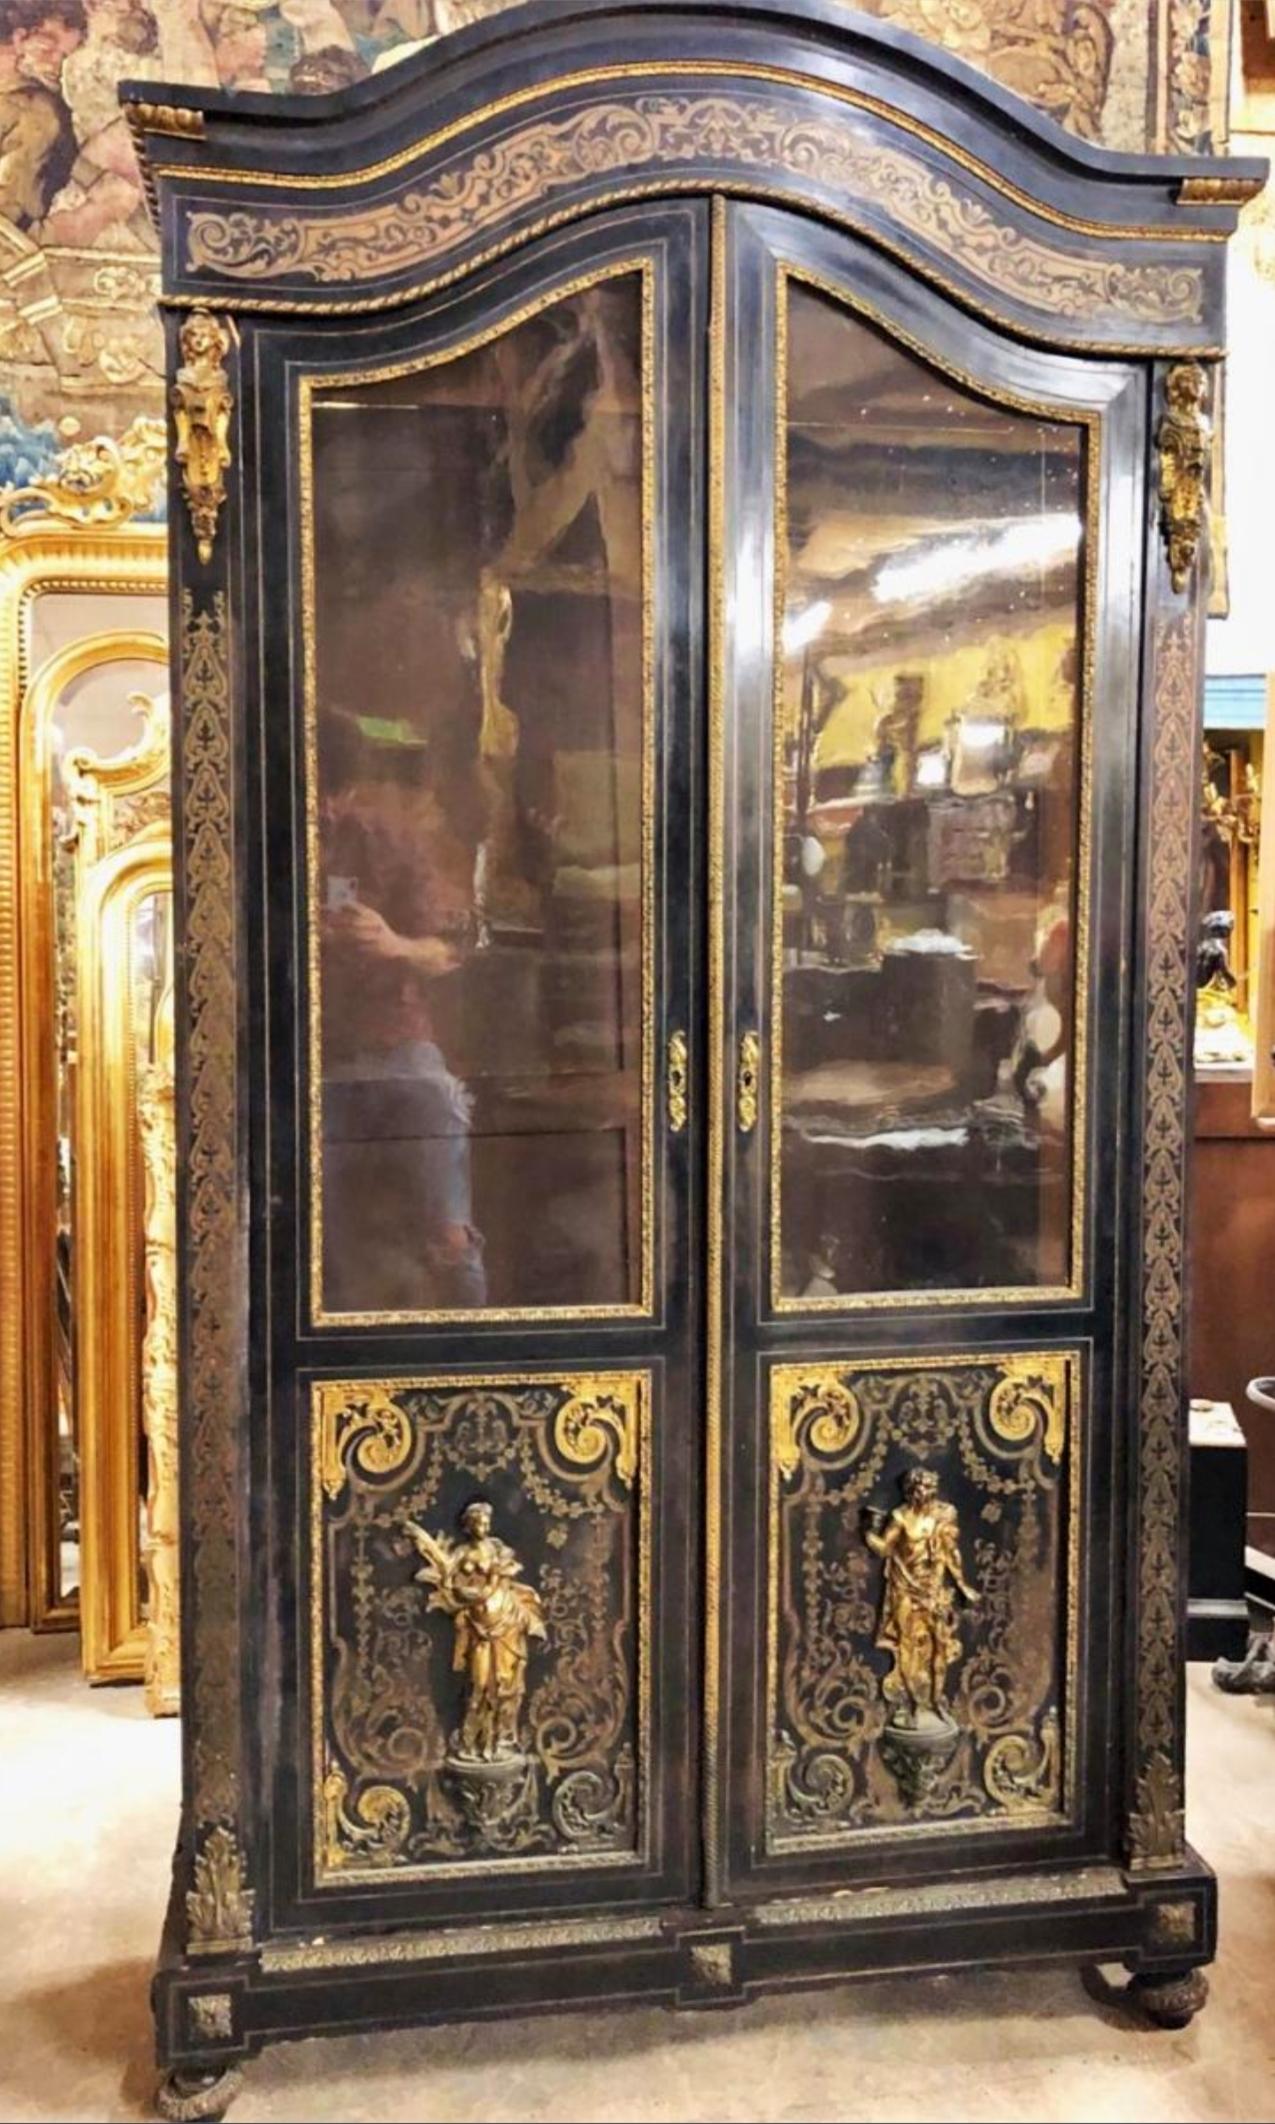 Rare showcase vitrine bookcase by Befort Jeune.
With 2 doors, Boulle style marquetry with brass inlay on brown horn background. Beautiful ornaments of gilt bronze taking the molds interspersed on the base, the écoincons, and specially Ceres and